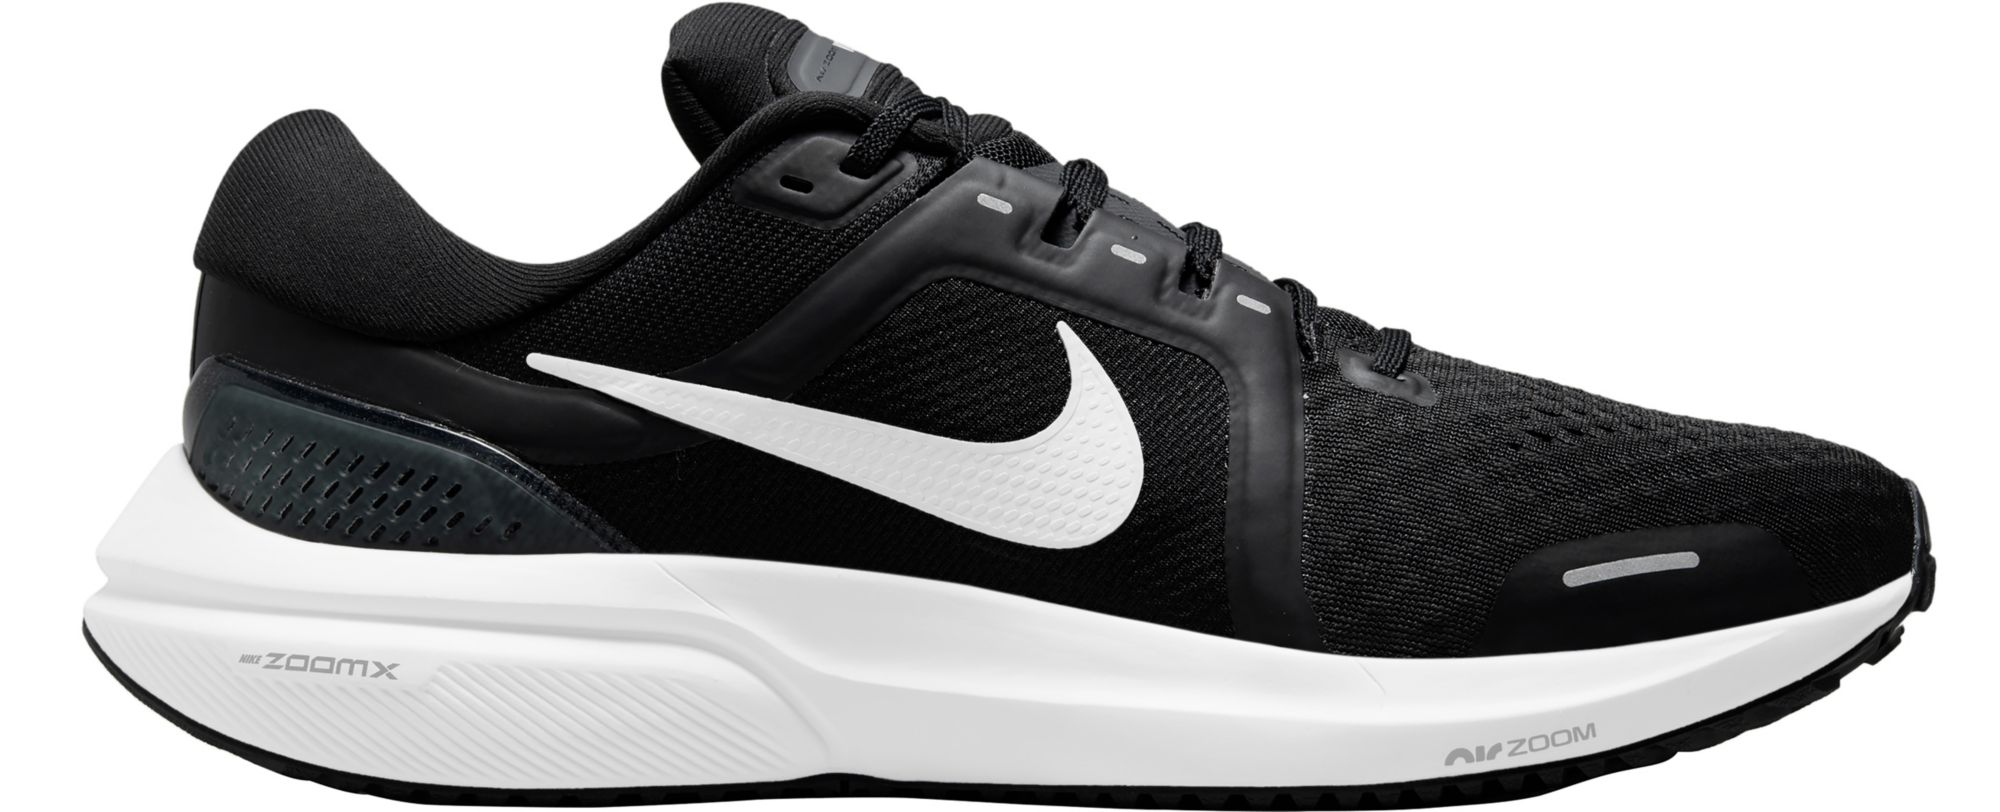 nike air zoom vomero 16 men's running shoes